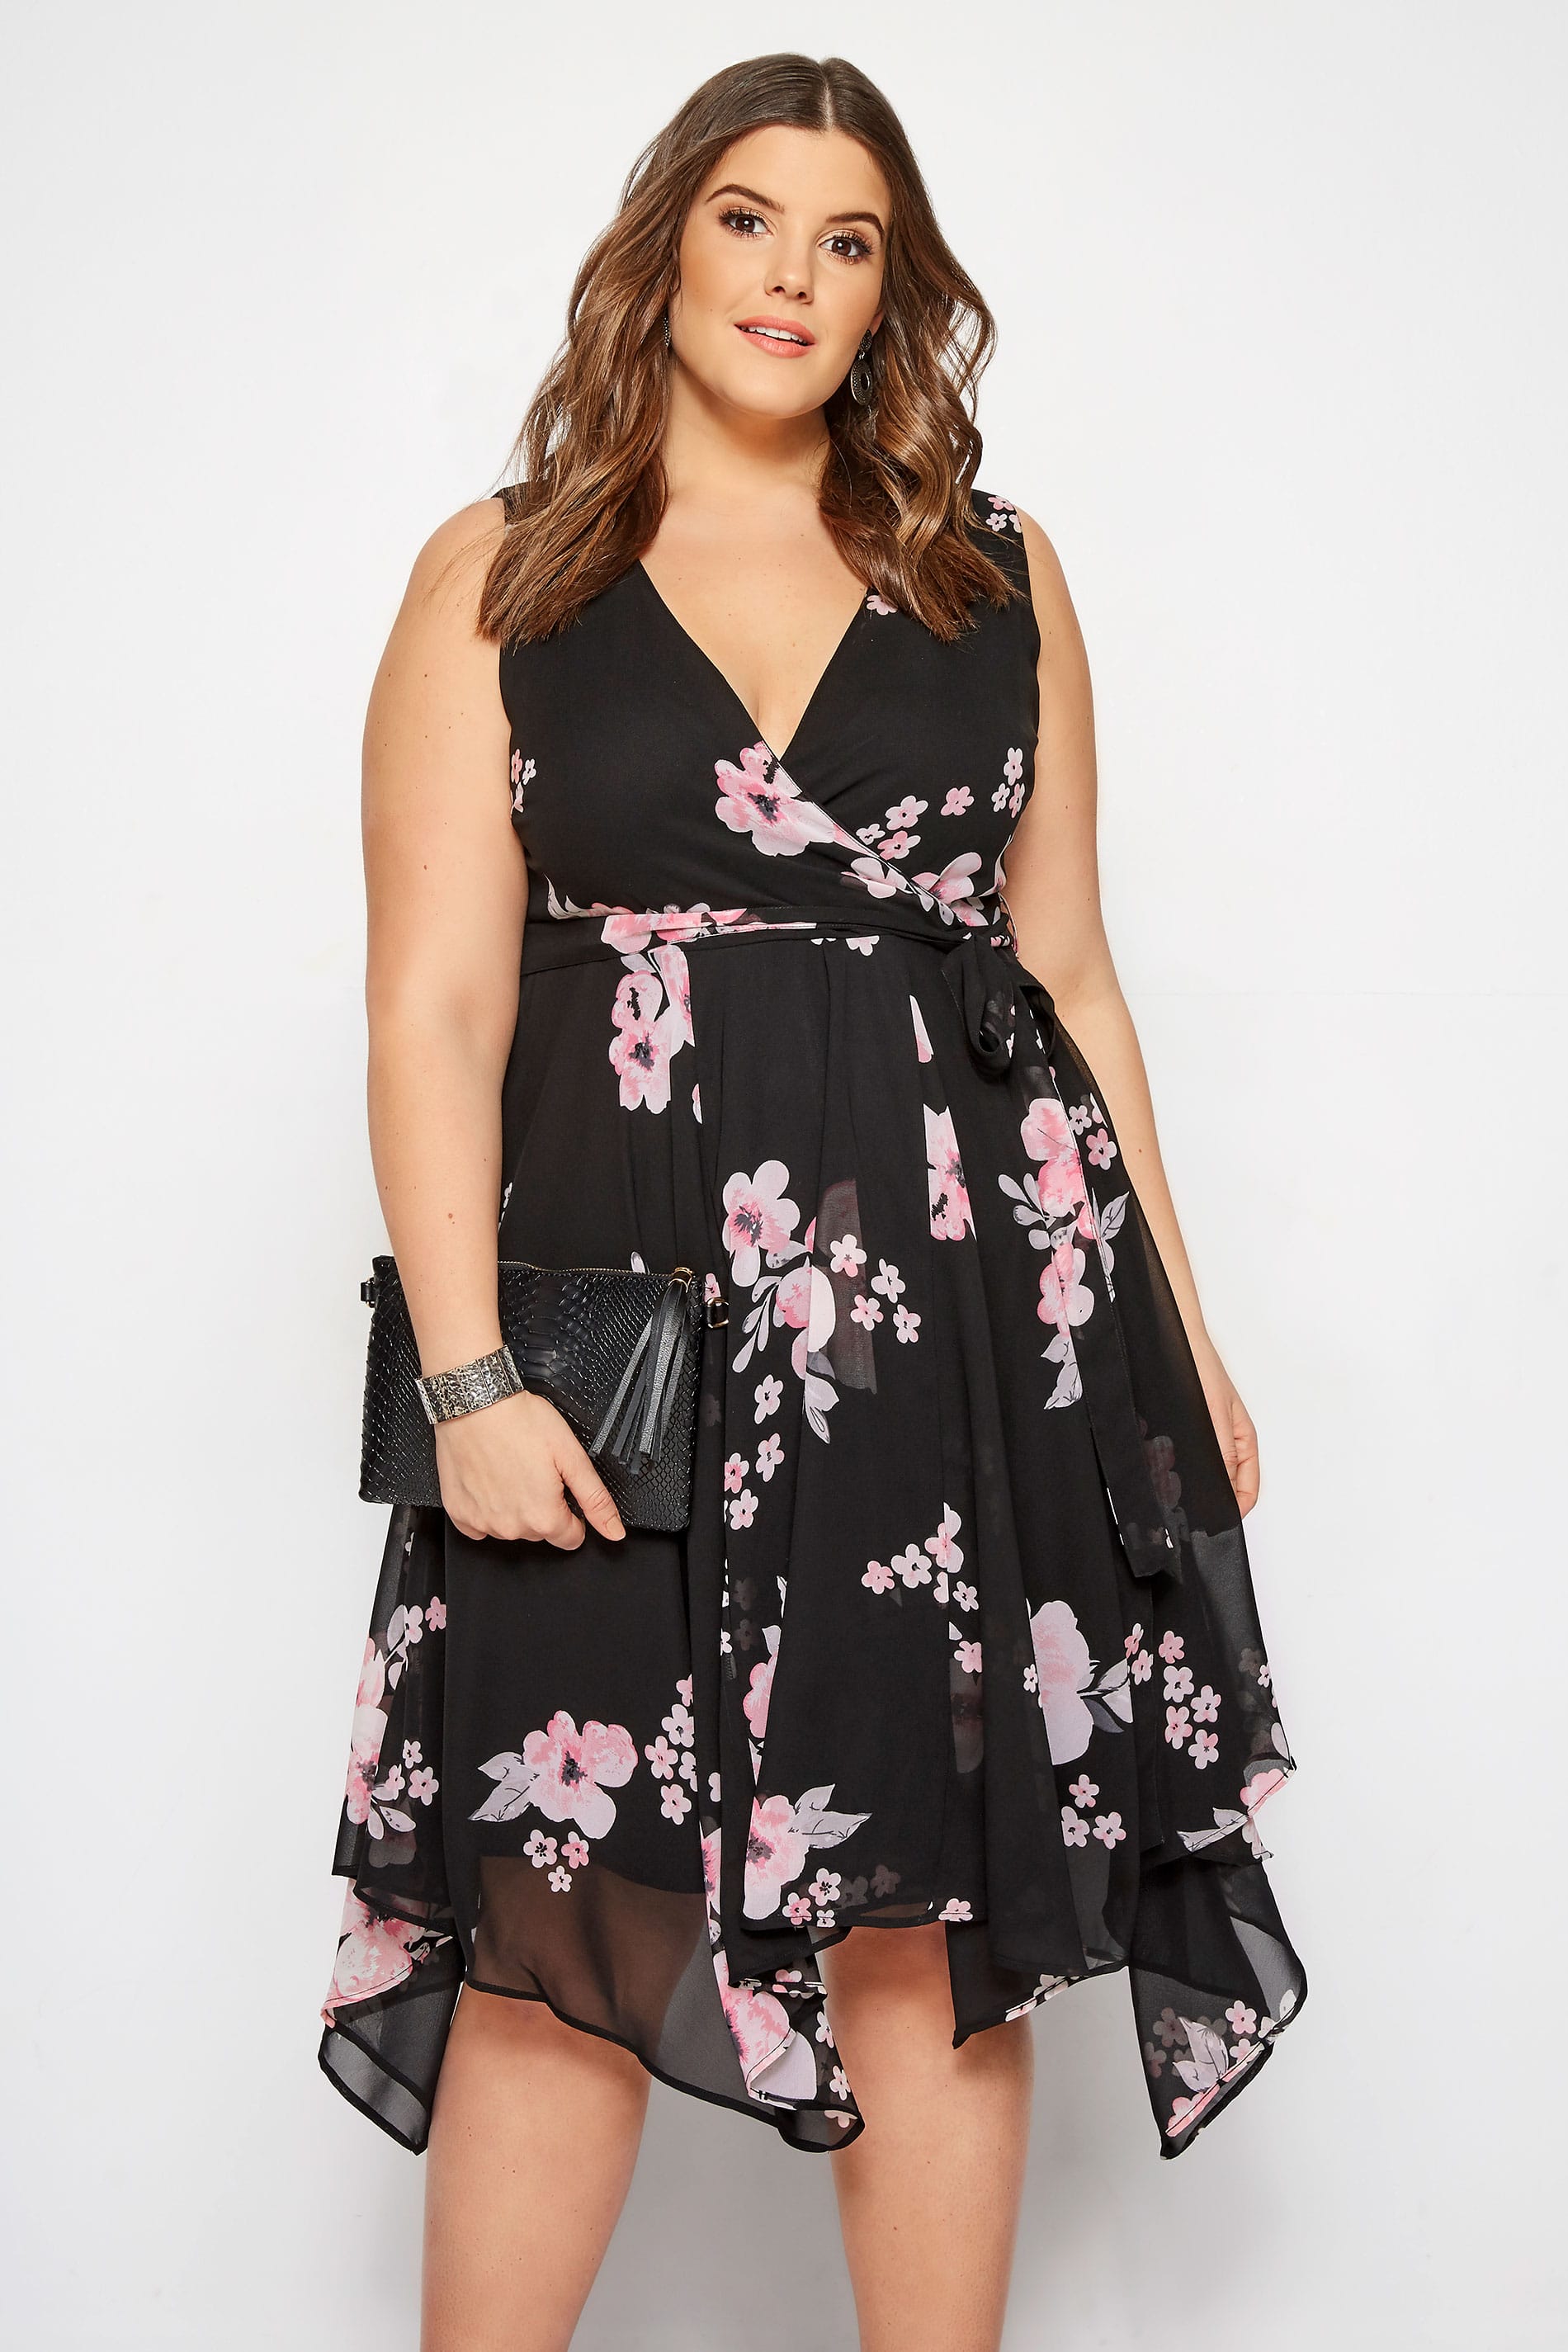 Plus Size Black & Pink Floral Wrap Dress With Hanky Hem | Sizes 16 to ...